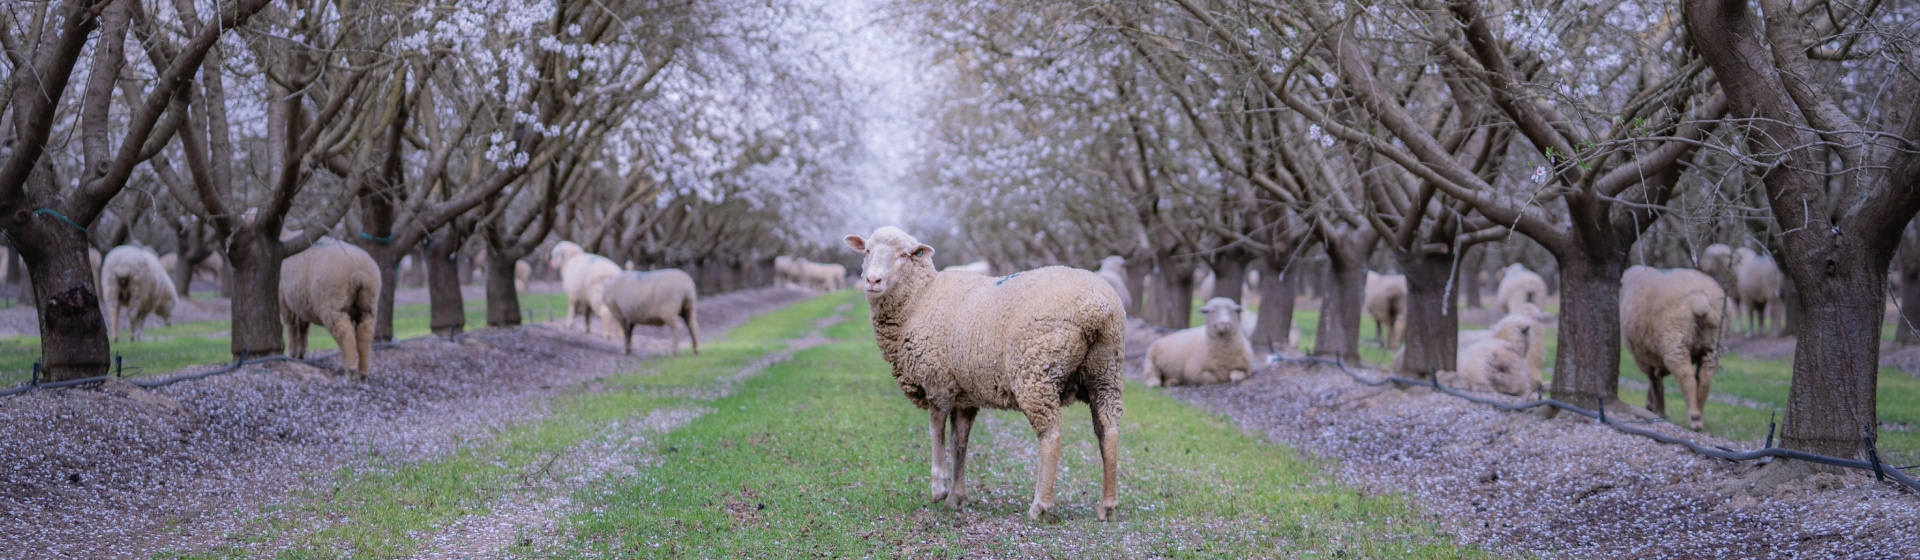 Sheep Scattered in the Almond Orchard - Treehouse Almonds Partnership